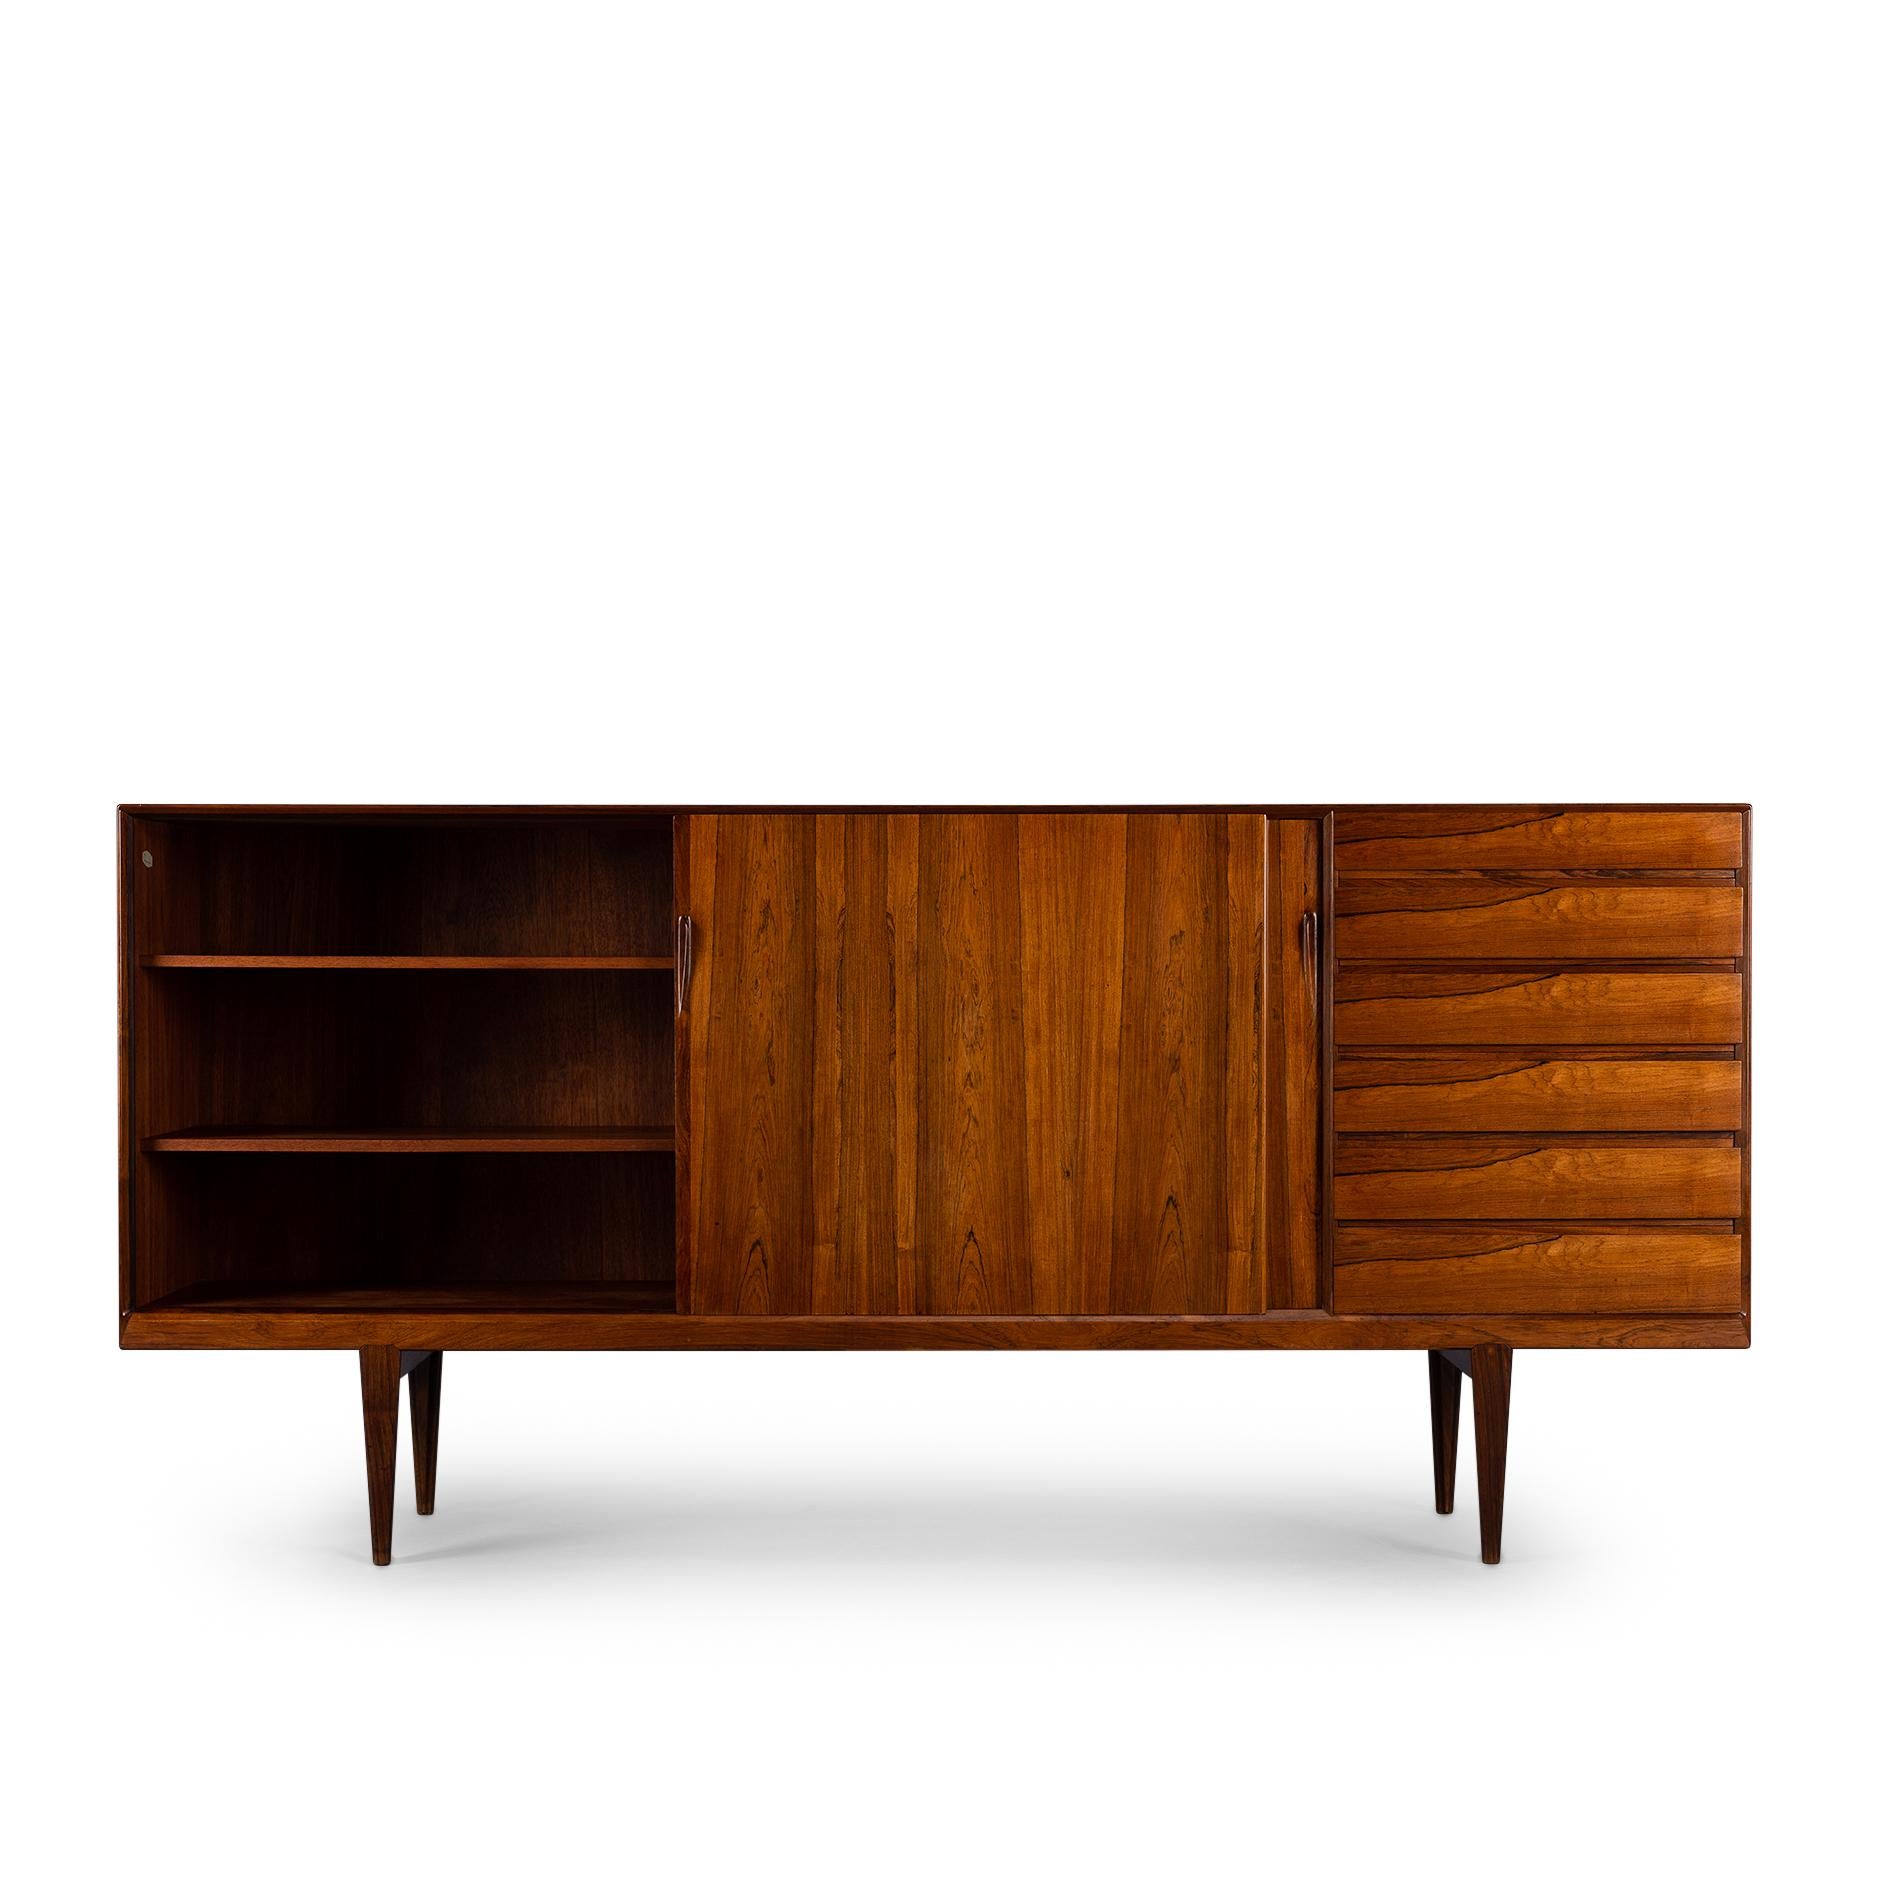 This elegantly designed credenza by Henri Rosengren Hansen for Brande Møbler provides for a true storage bonanza in a superb patterned rosewood veneer shell. A righthand console consisting of 6 spaceous drawers with superbly bevelled drawers with